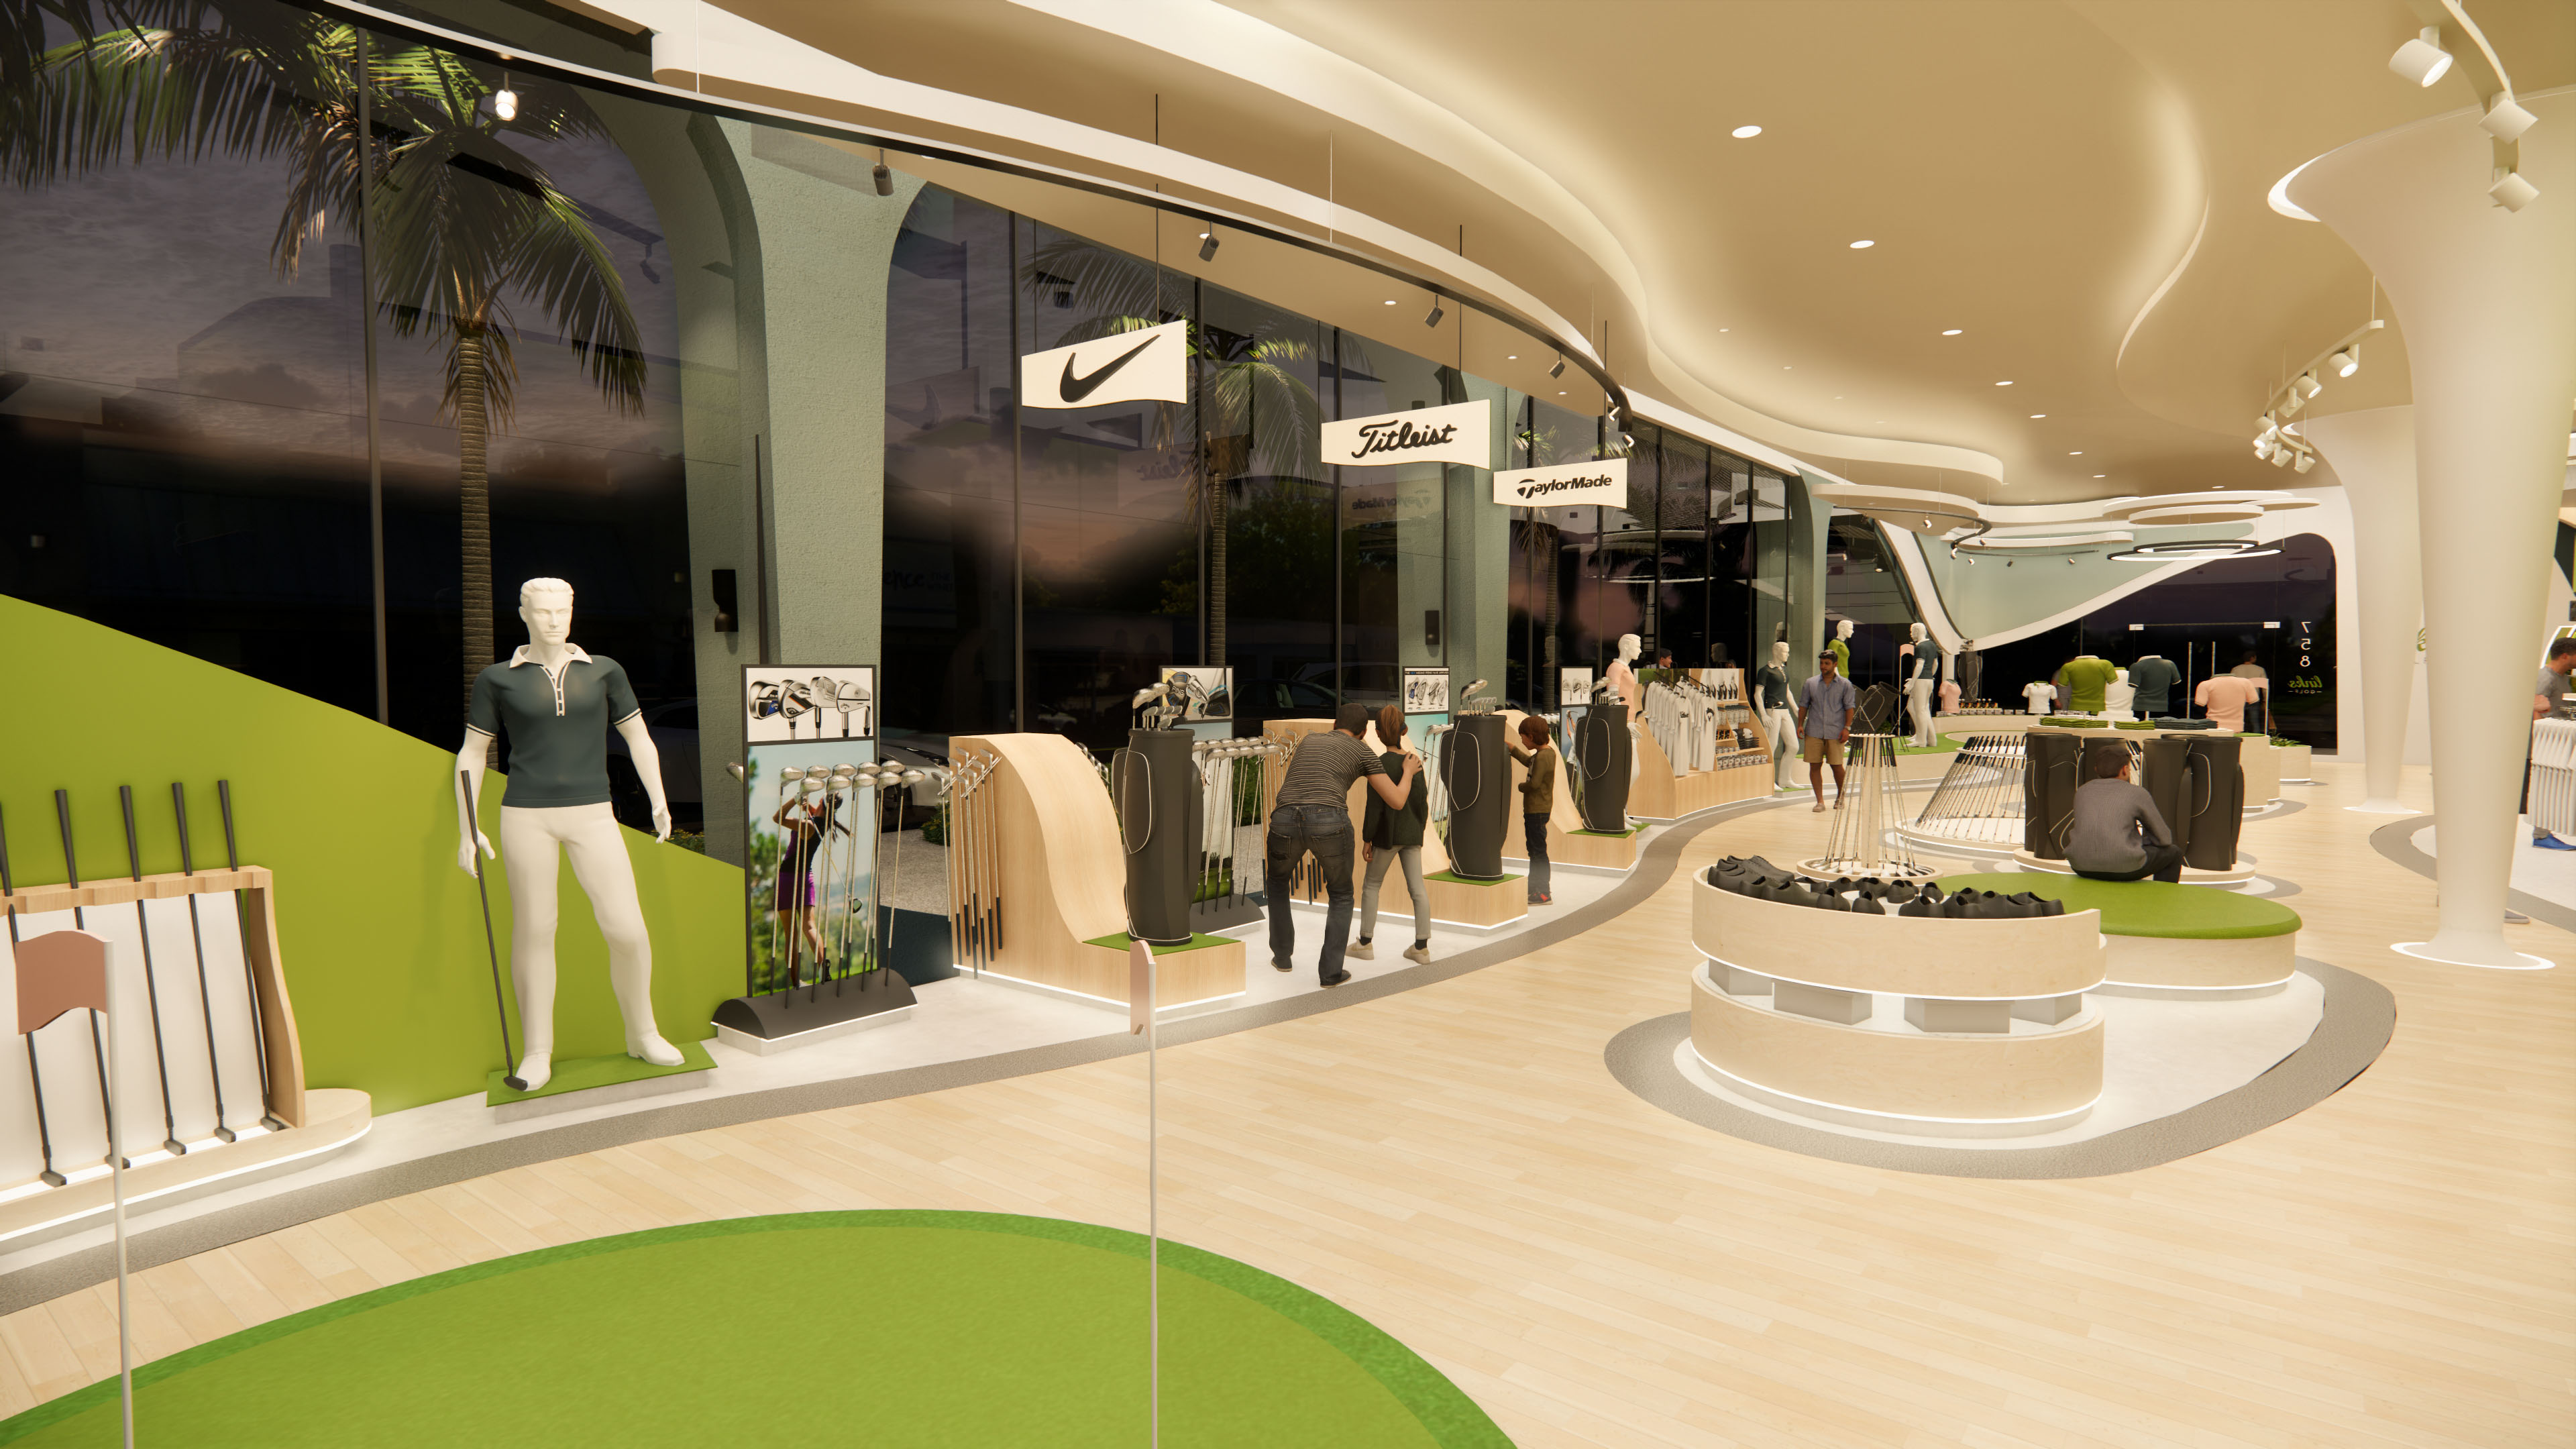 night time view of the golf club retail section of a store with patrons trying out clubs